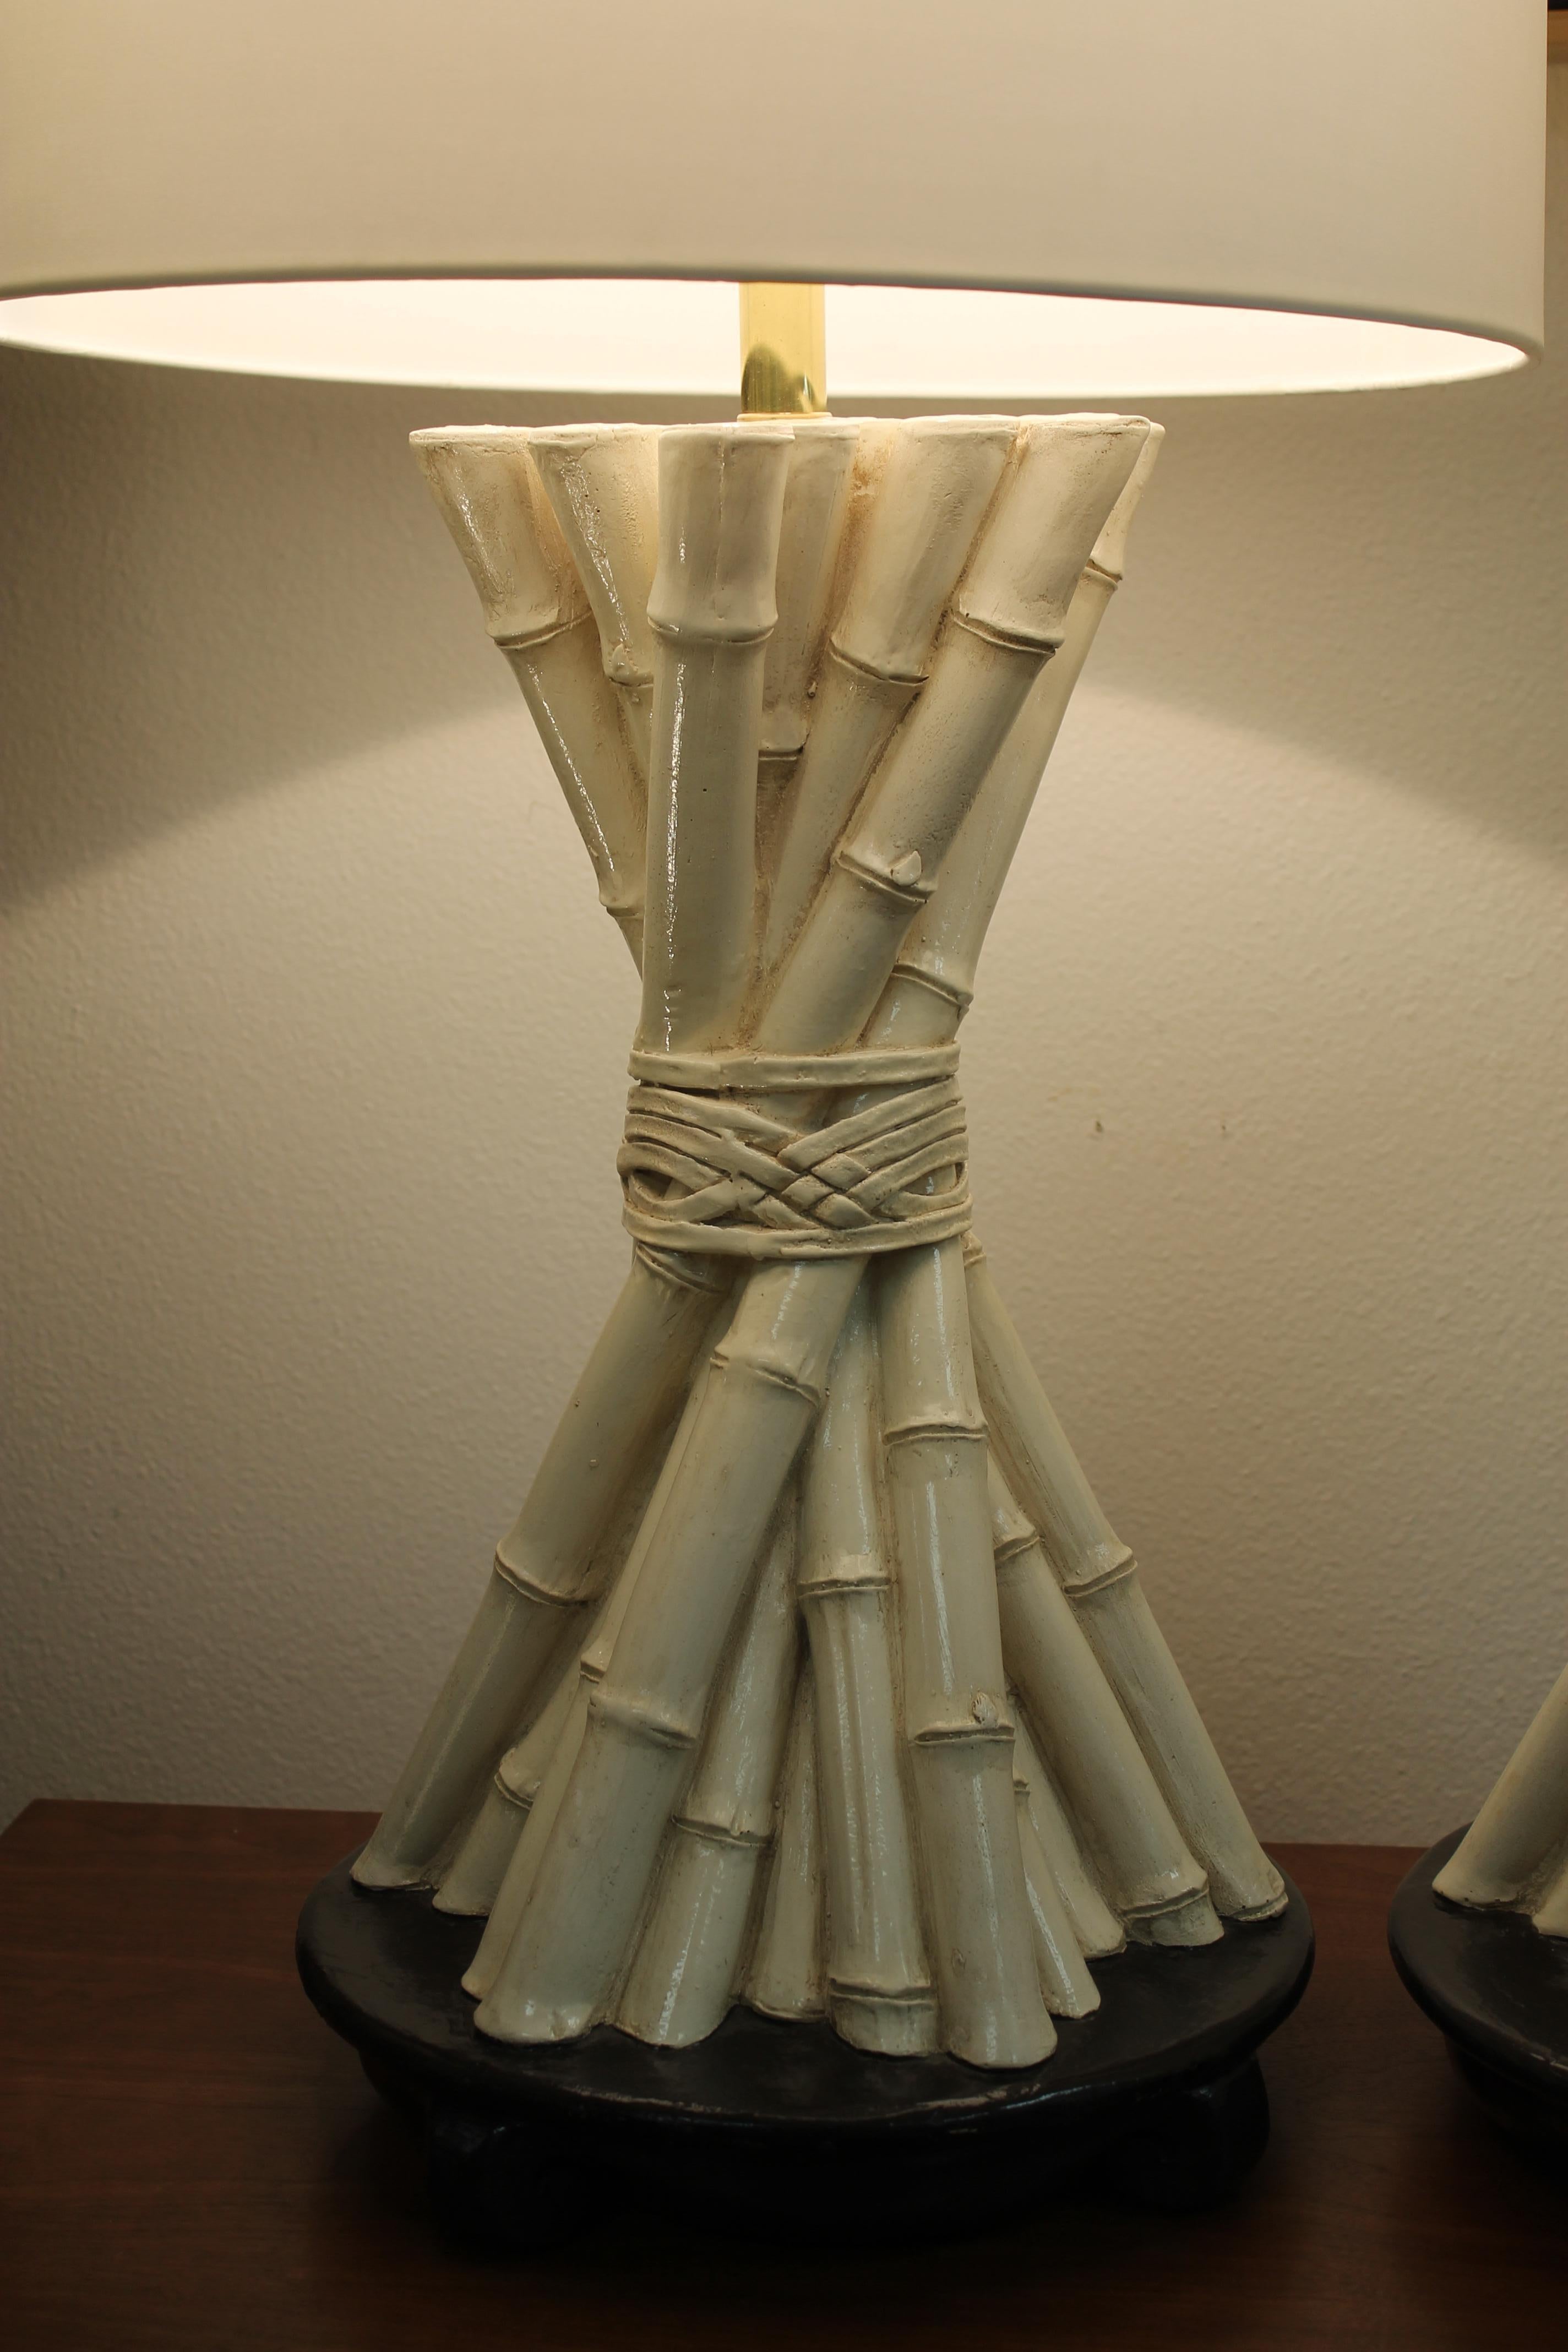 Pair of plaster lamps by Lighthouse and dated 1977. Pattern of tied bundle of bamboo. Plaster portions of lamps are 20.25” high with a 3” brass neck. Total height from base to the bottom of socket is 23.5